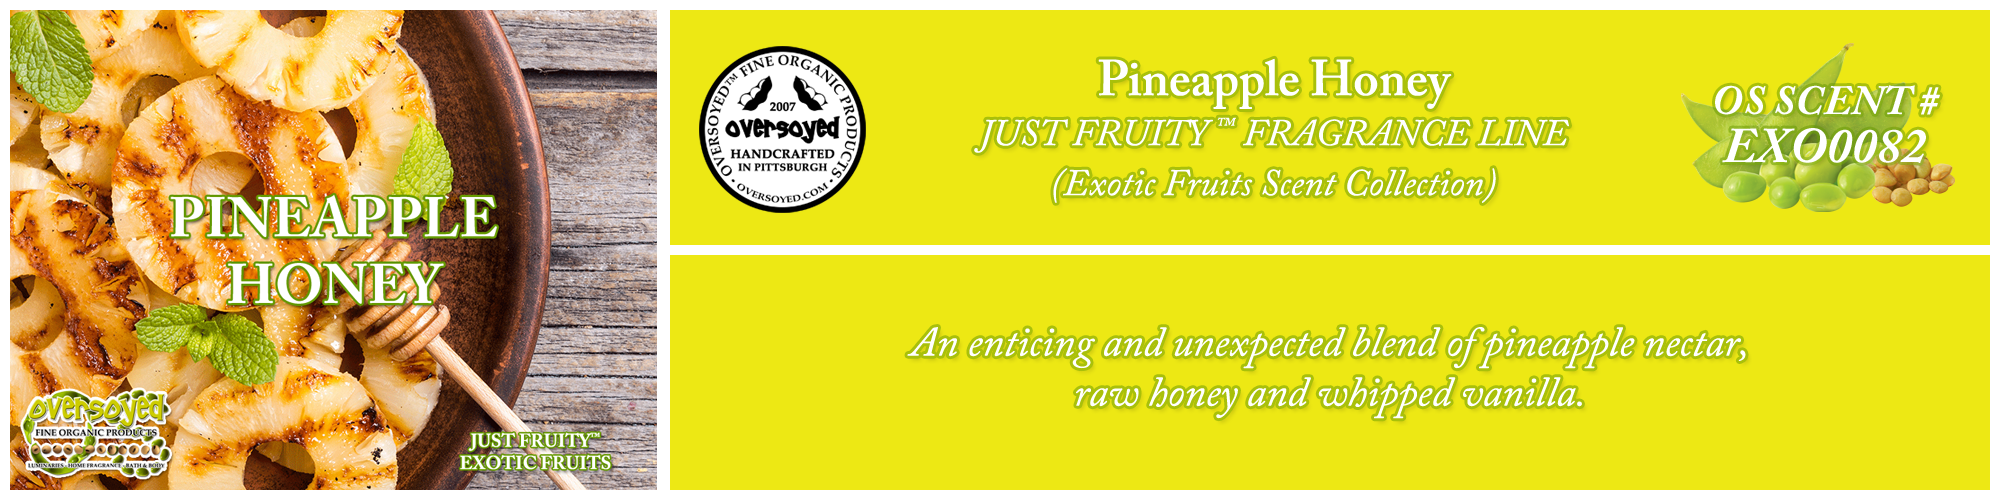 Pineapple Honey Handcrafted Products Collection